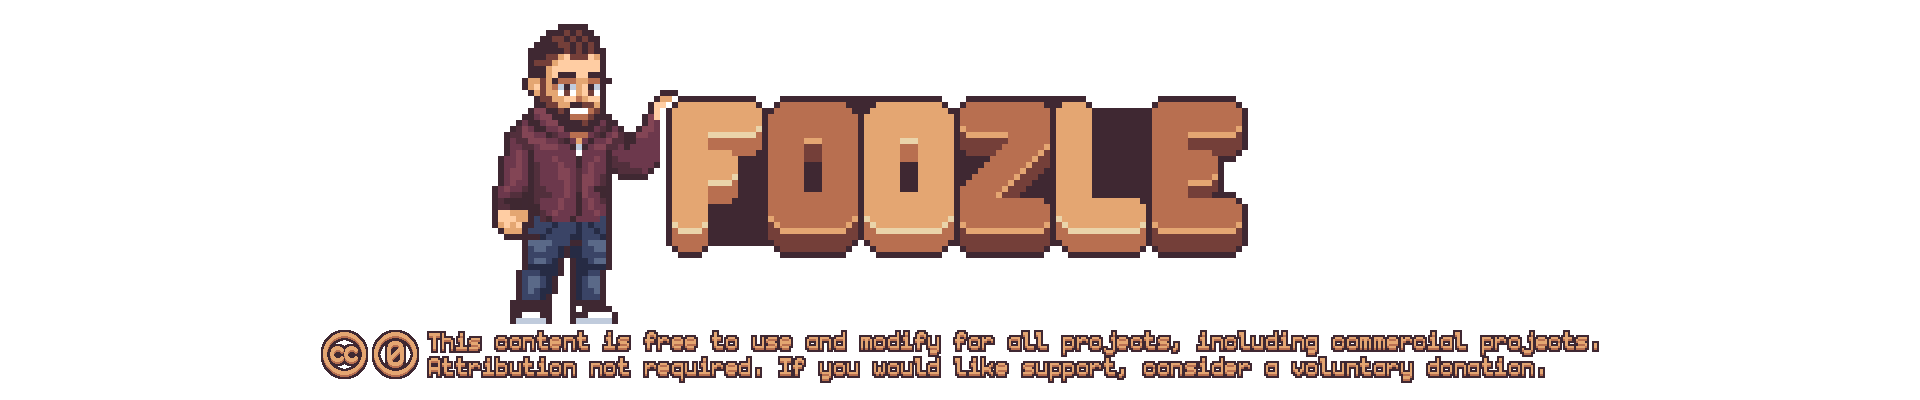 Foozle All Assets Collection